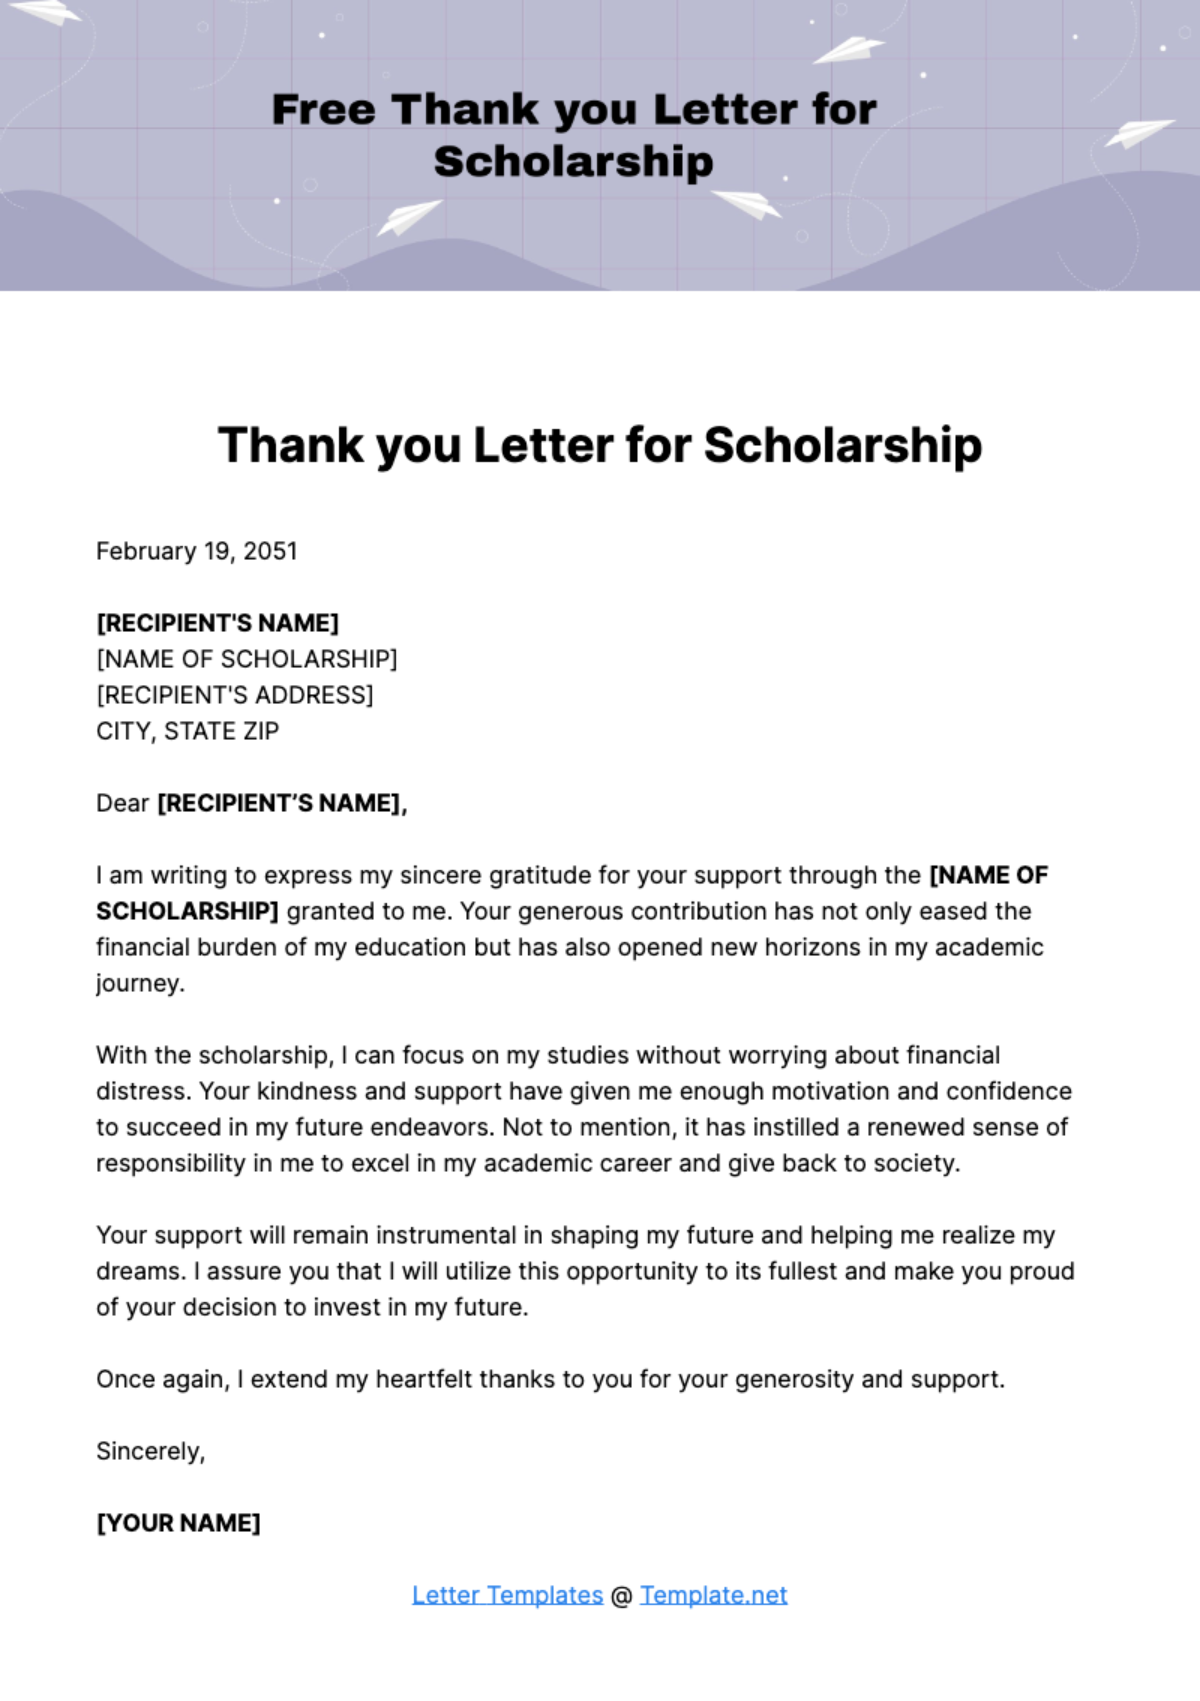 Free Thank you Letter for Scholarship Template